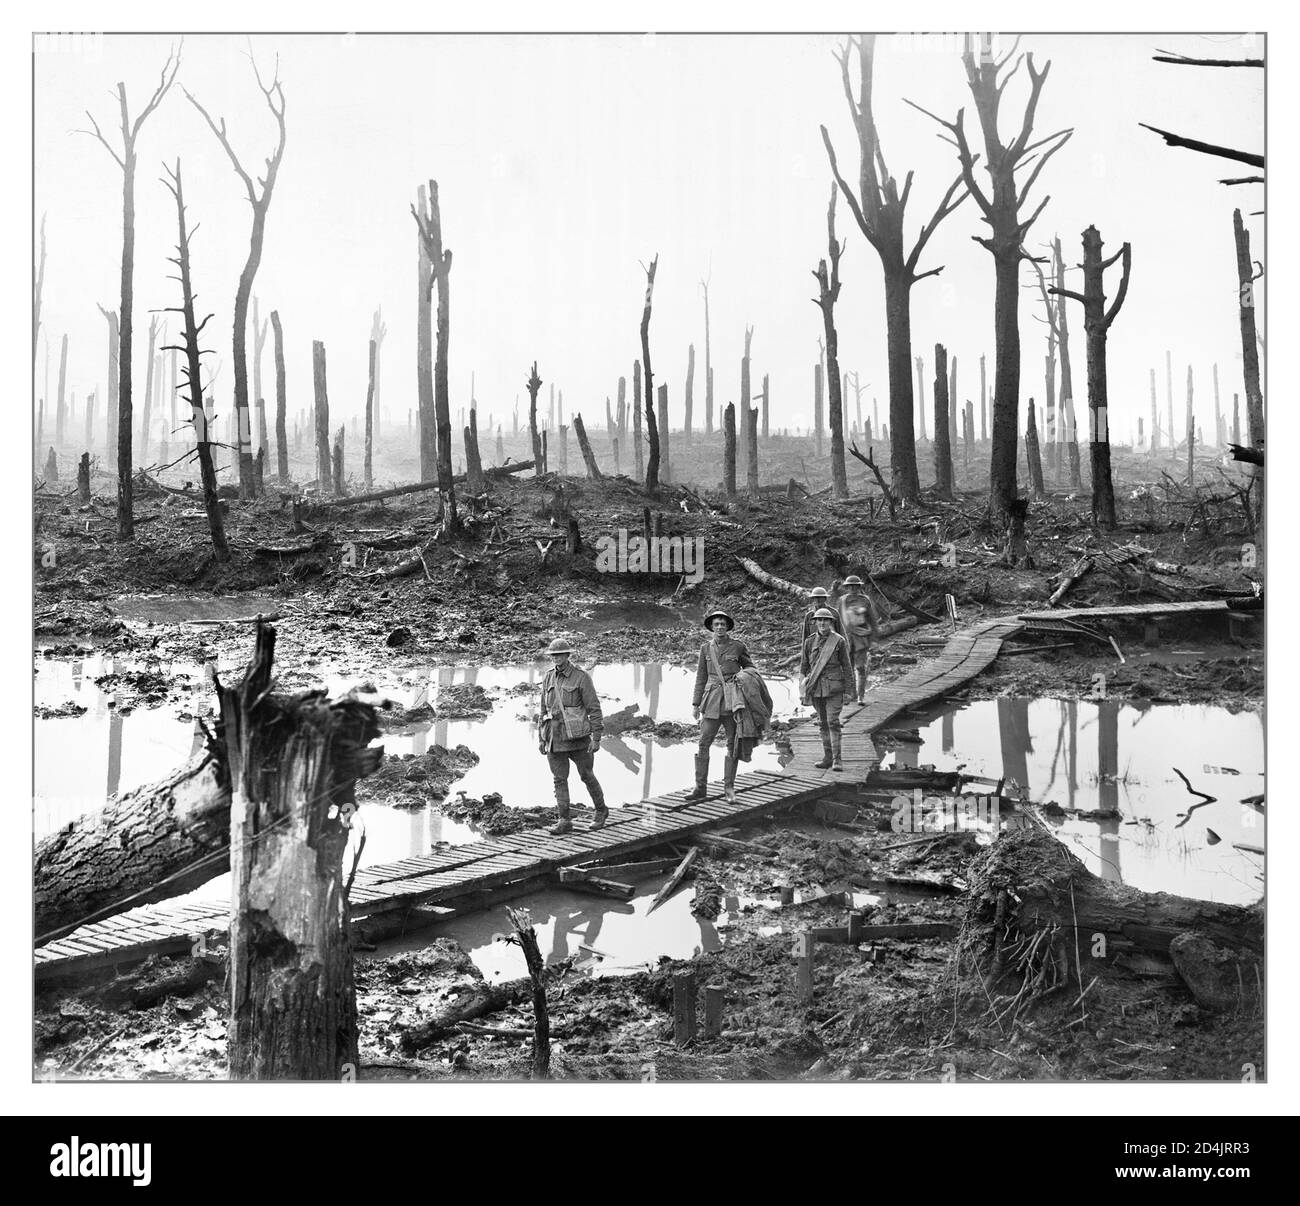 Archive WW1 PASSCHENDAELE BATTLEFIELD AFTERMATH 12 October 1917  the 3rd Australian Division and the New Zealanders, assisted by the 4th Australian Division, were launched against the village of Passchendaele. Weather had turned the battlefield into mud. Artillery support weak; shells exploded harmlessly in the mud, neither cutting the enemy’s barbed wire nor silencing the guns. The New Zealanders fought across 2,300 metres of mud to be slaughtered by machine-guns. The Australians reached the edge of Passchendaele but, with mounting losses, were forced to withdraw. The attack was a disaster. Stock Photo